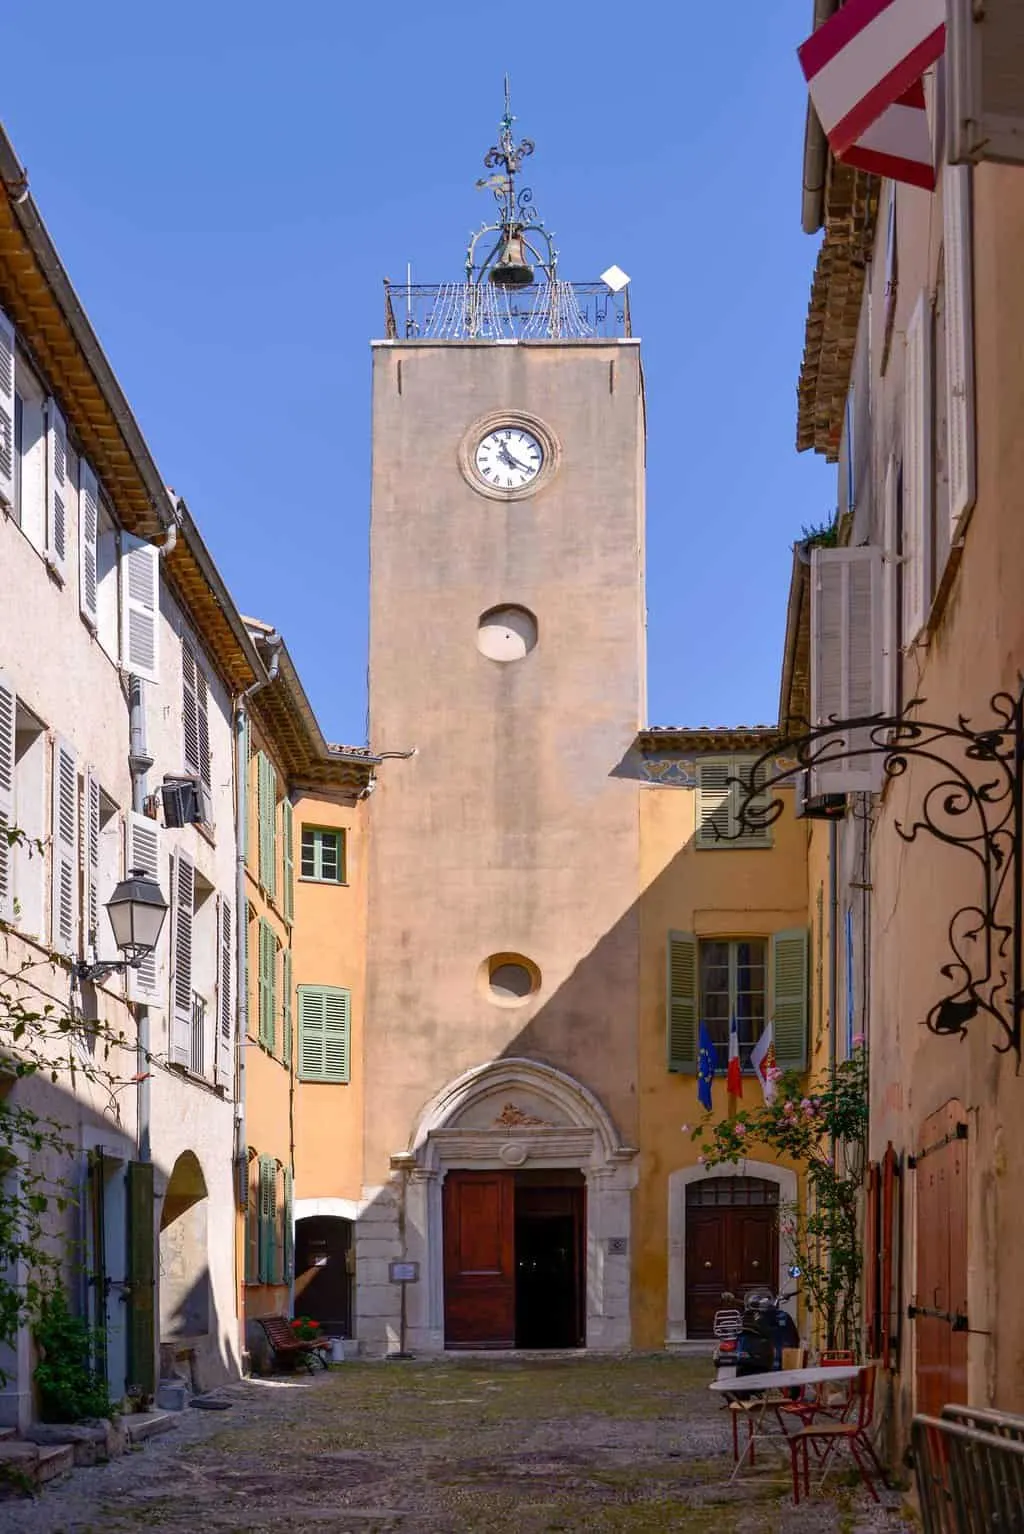 A church steeple tower at the end of a narrow lane in Biot France. 